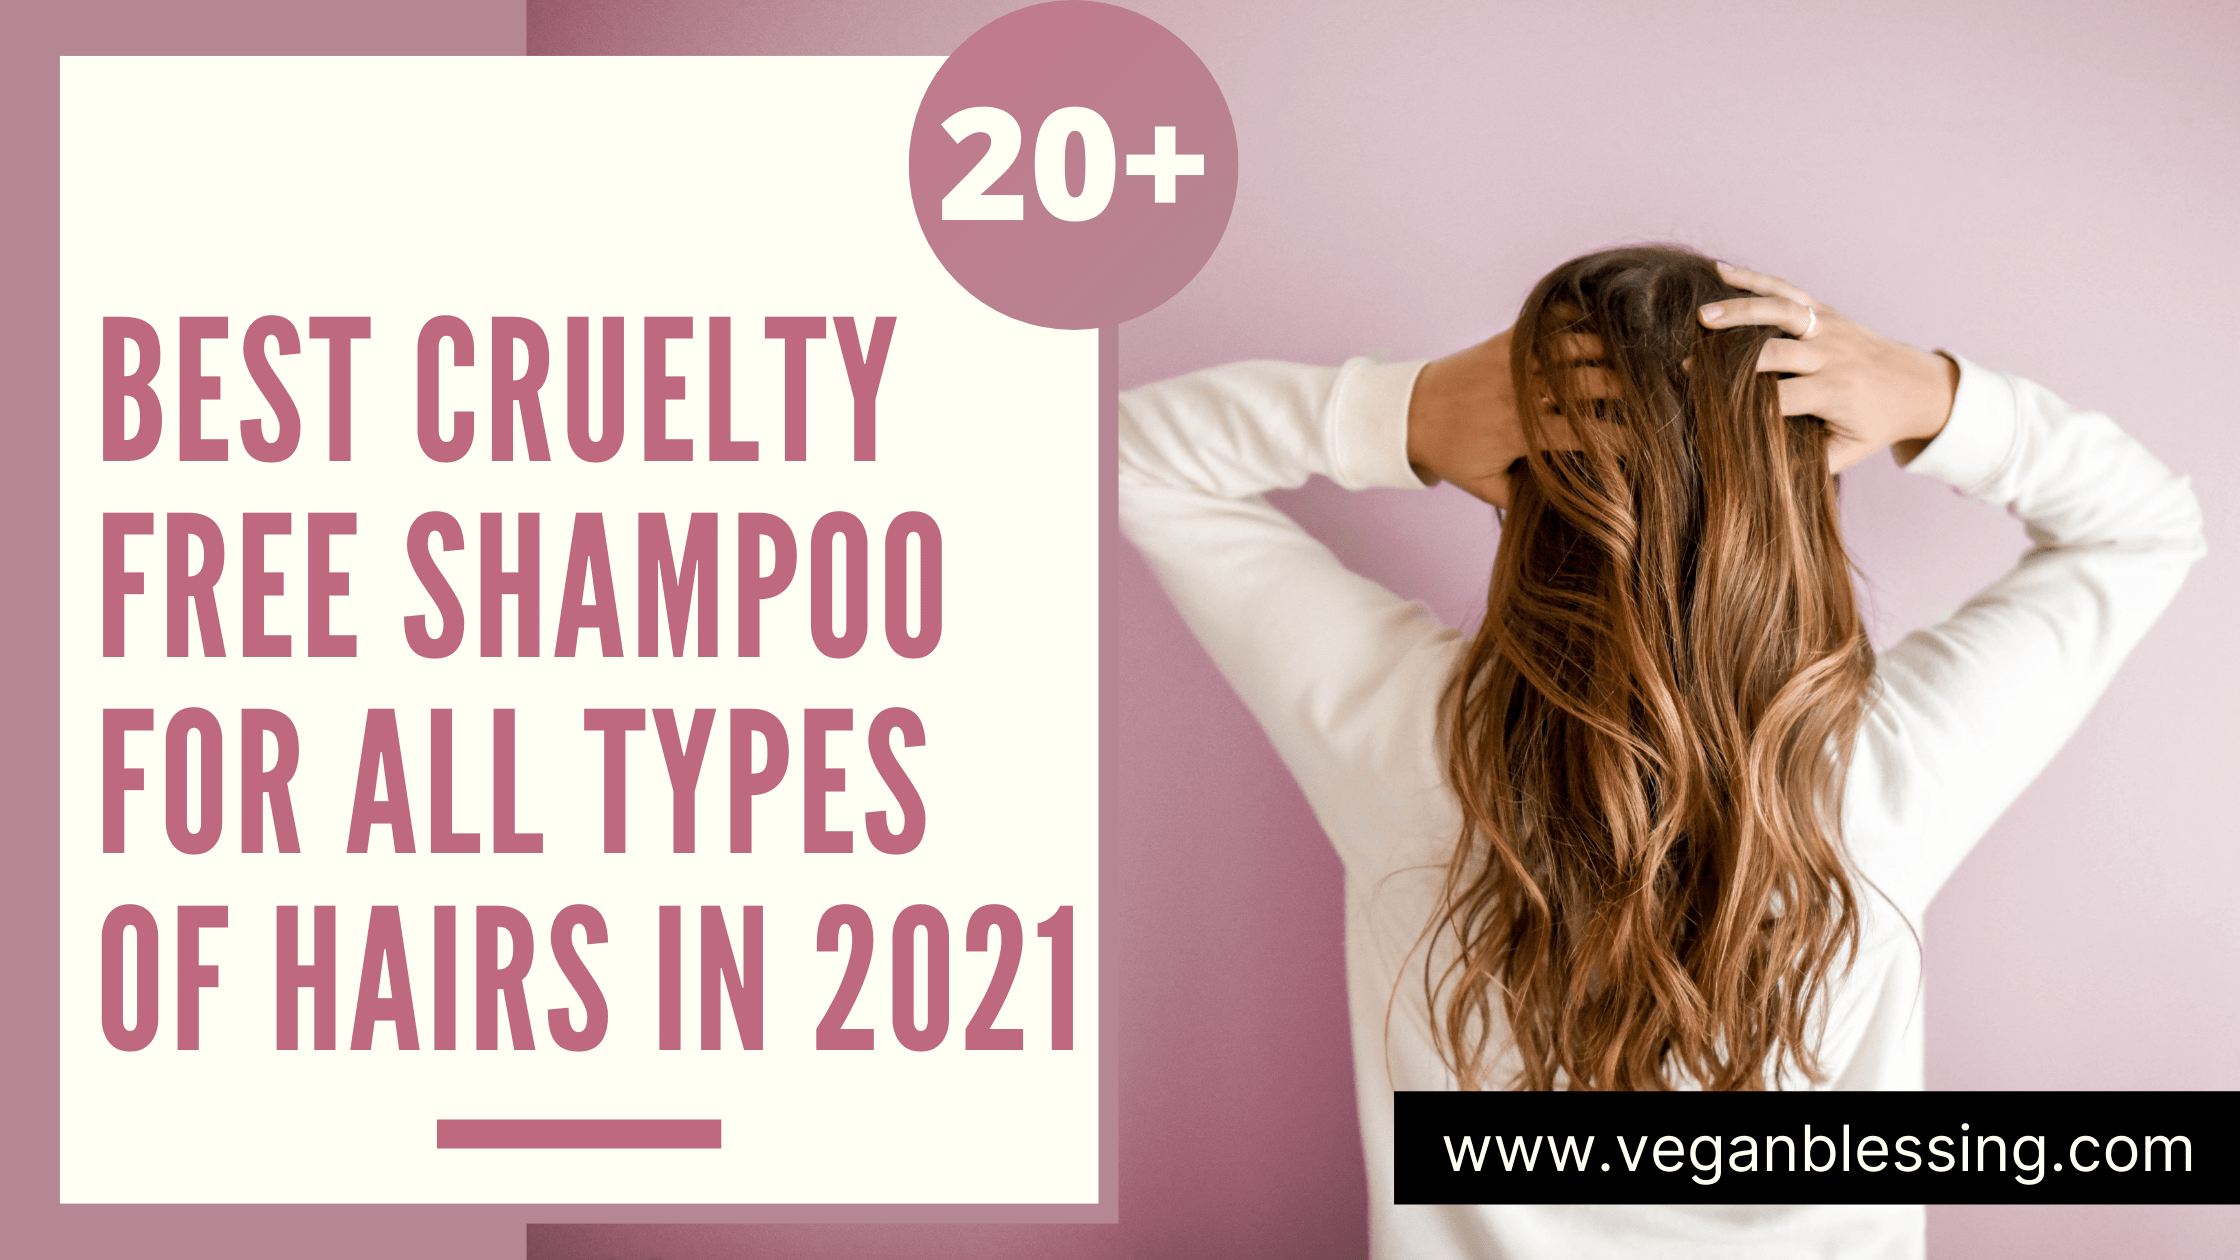 Best cruelty free Shampoo for all Types of Hairs in 2021